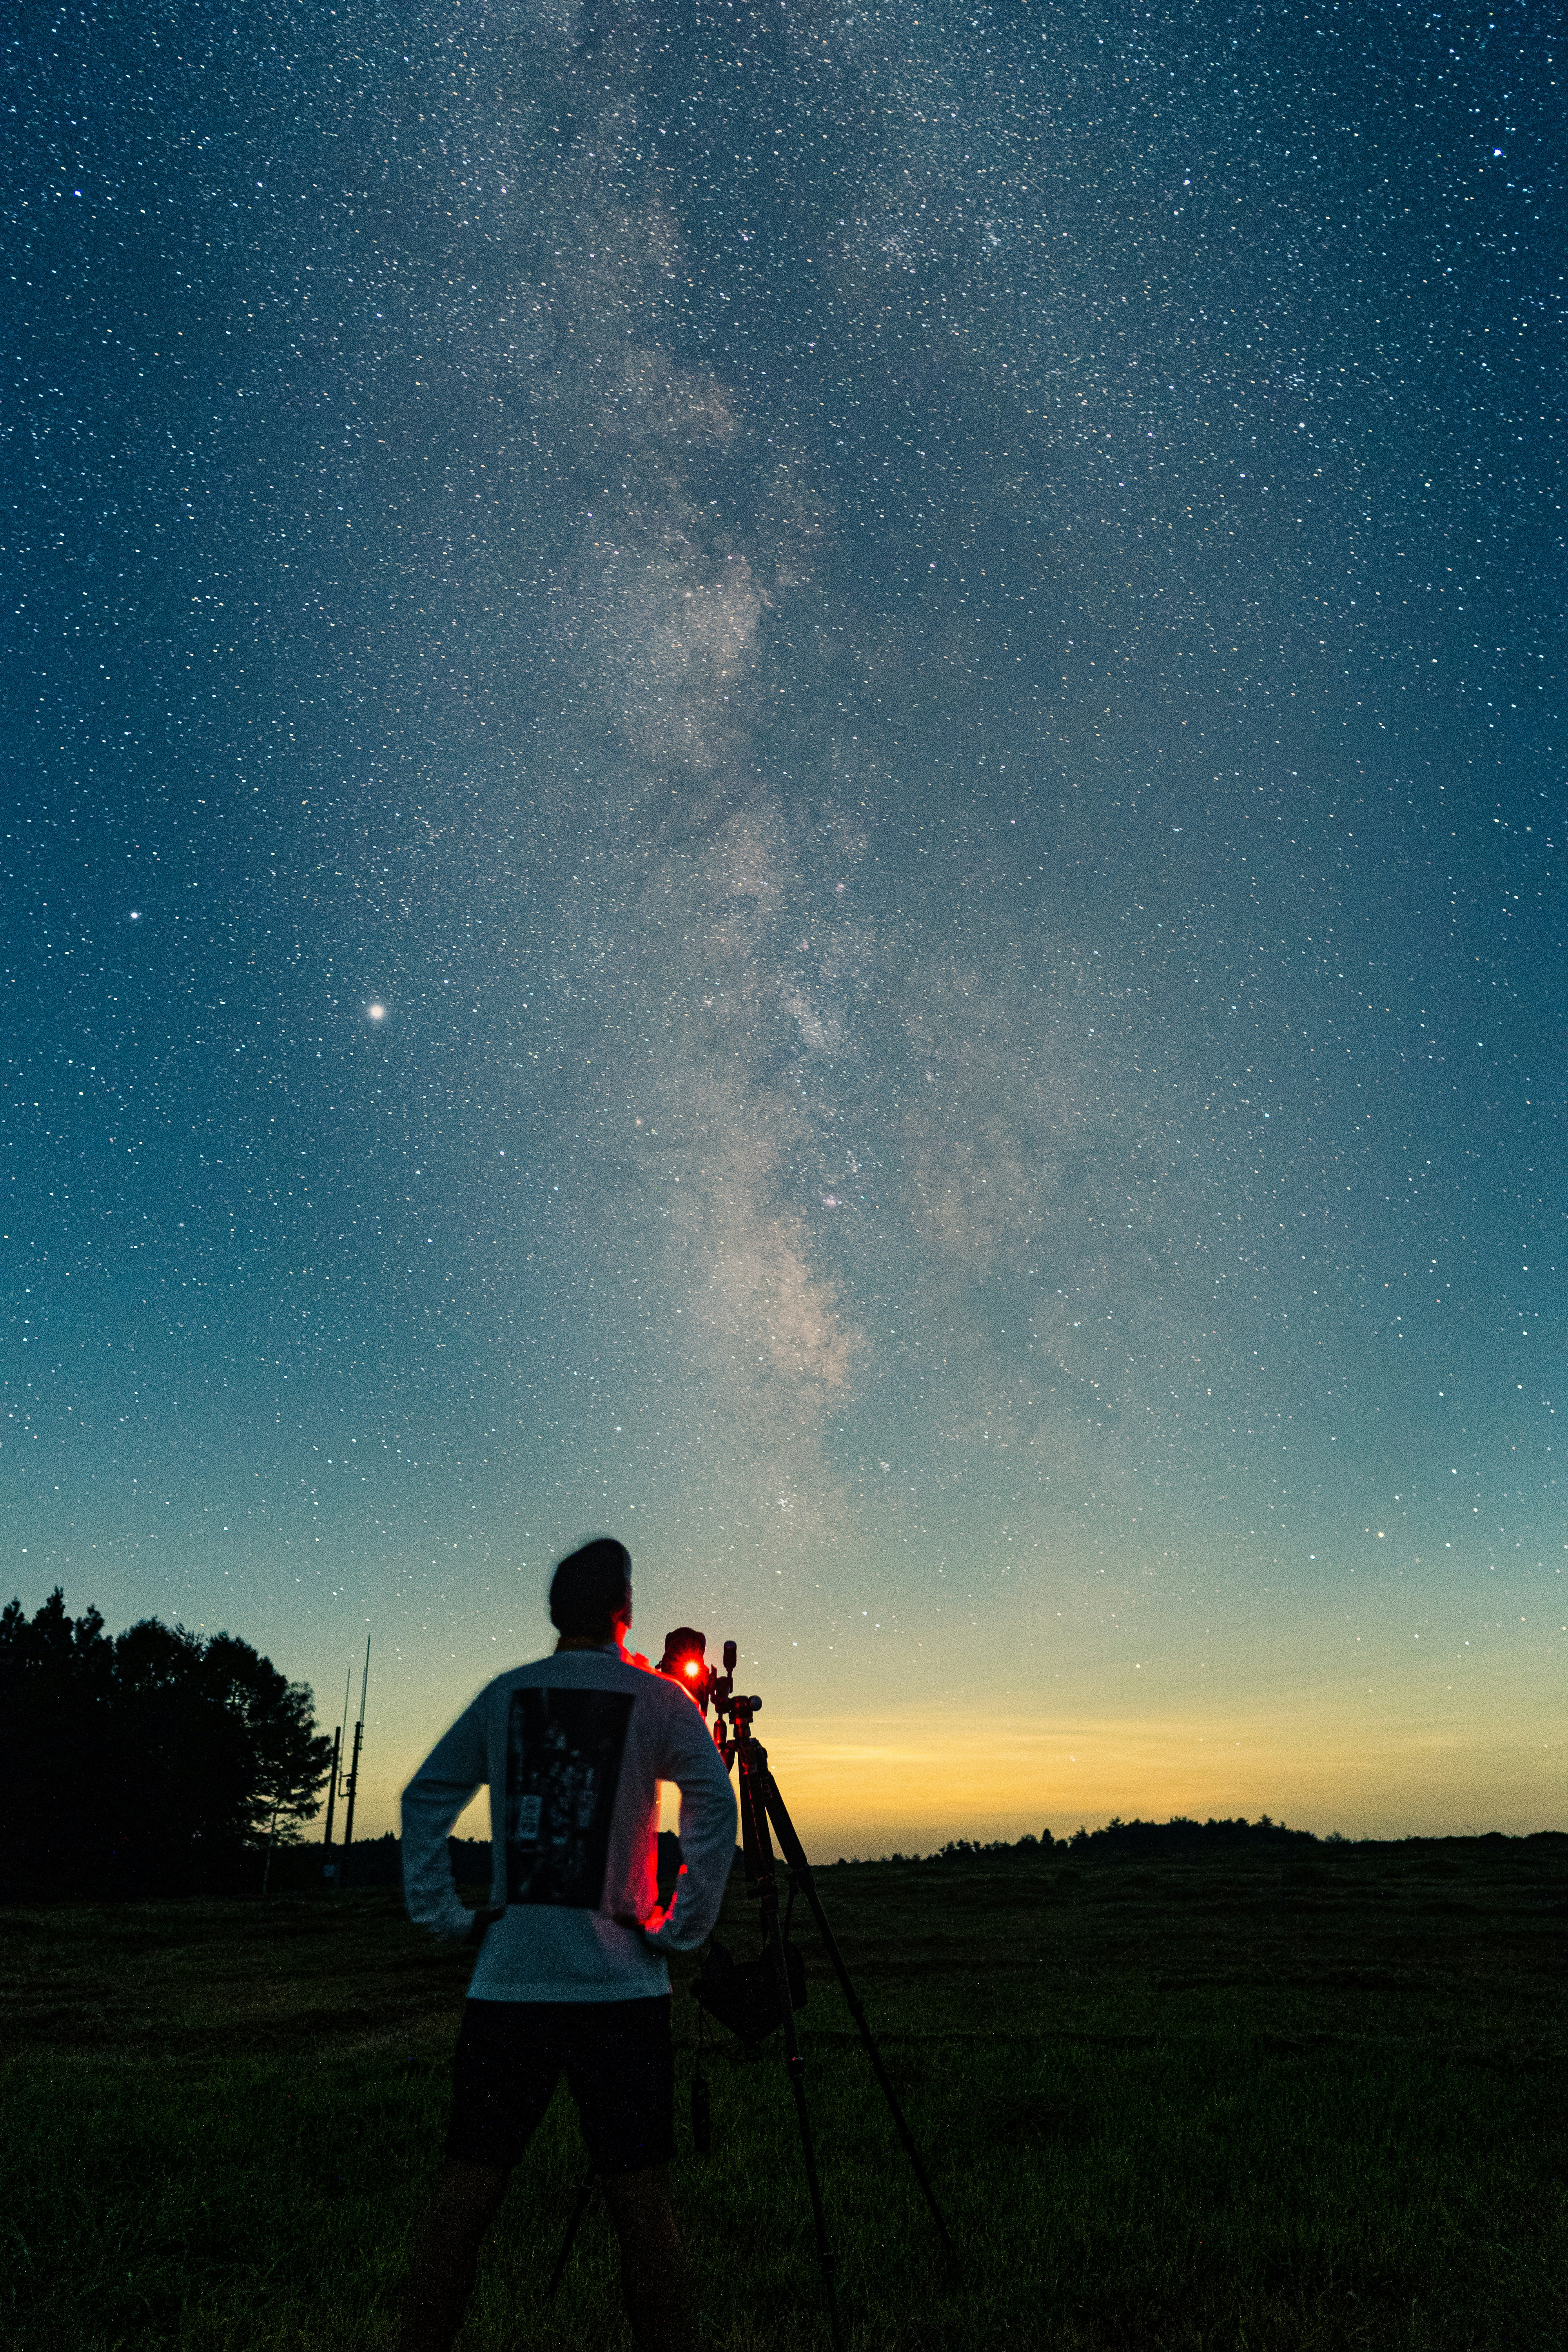 Man stands behind telescope viewing the sky at dusk